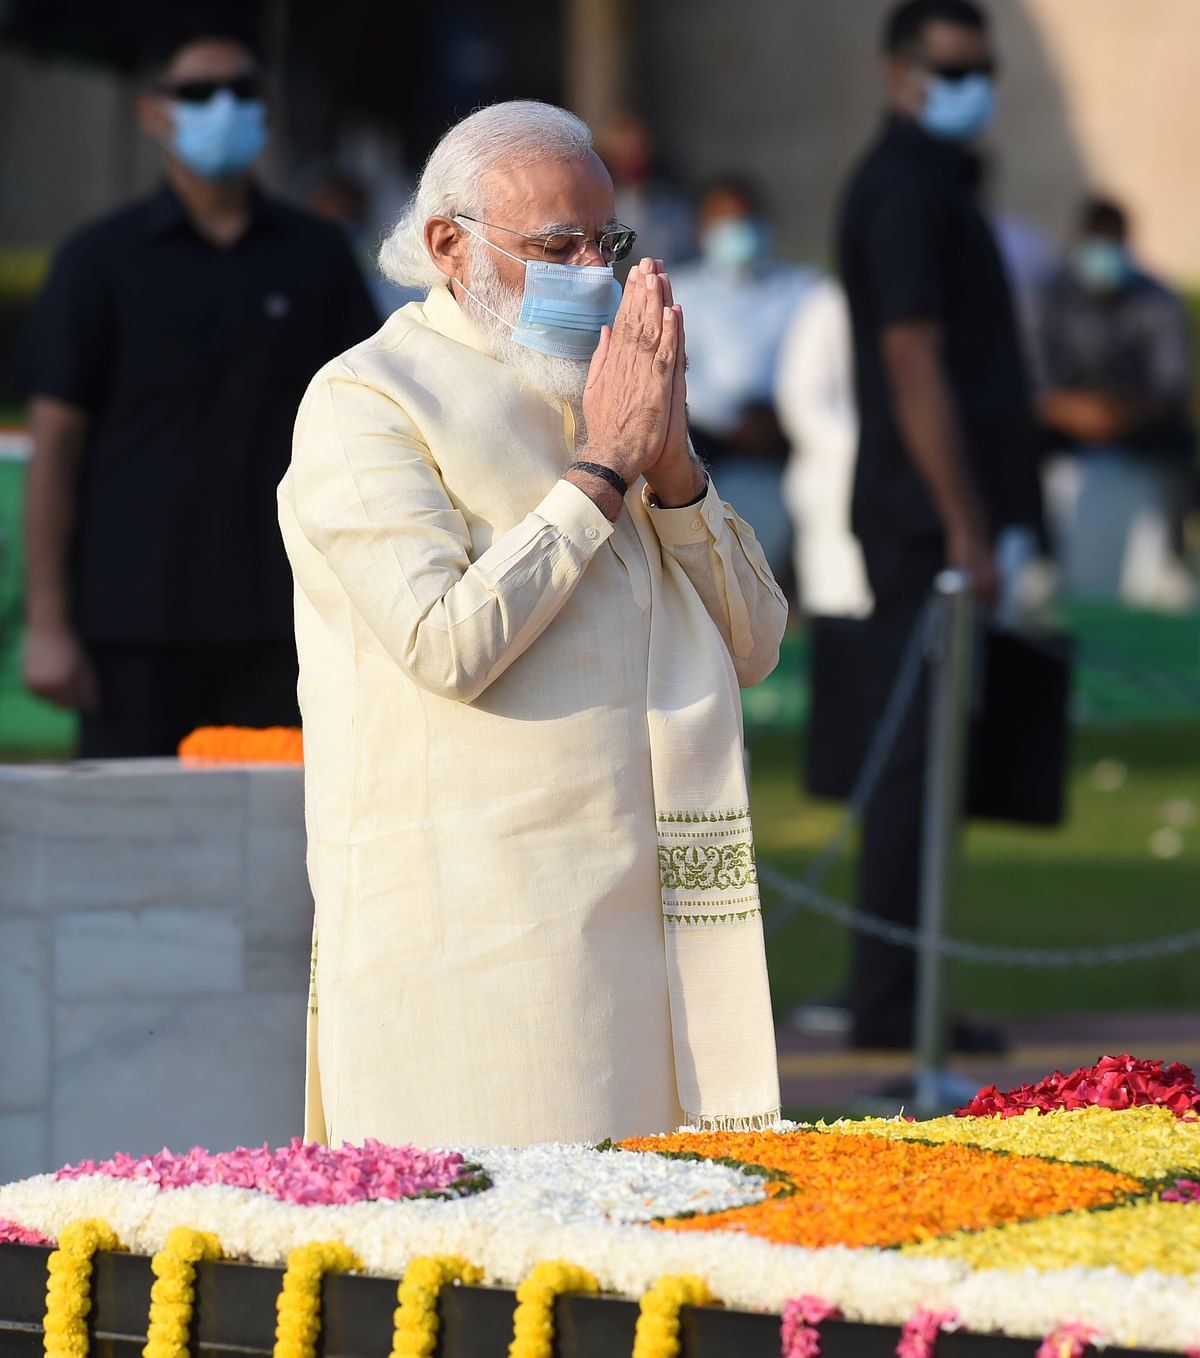 “May Bapu’s ideals keep guiding us in creating a prosperous and compassionate India,” PM Modi said.